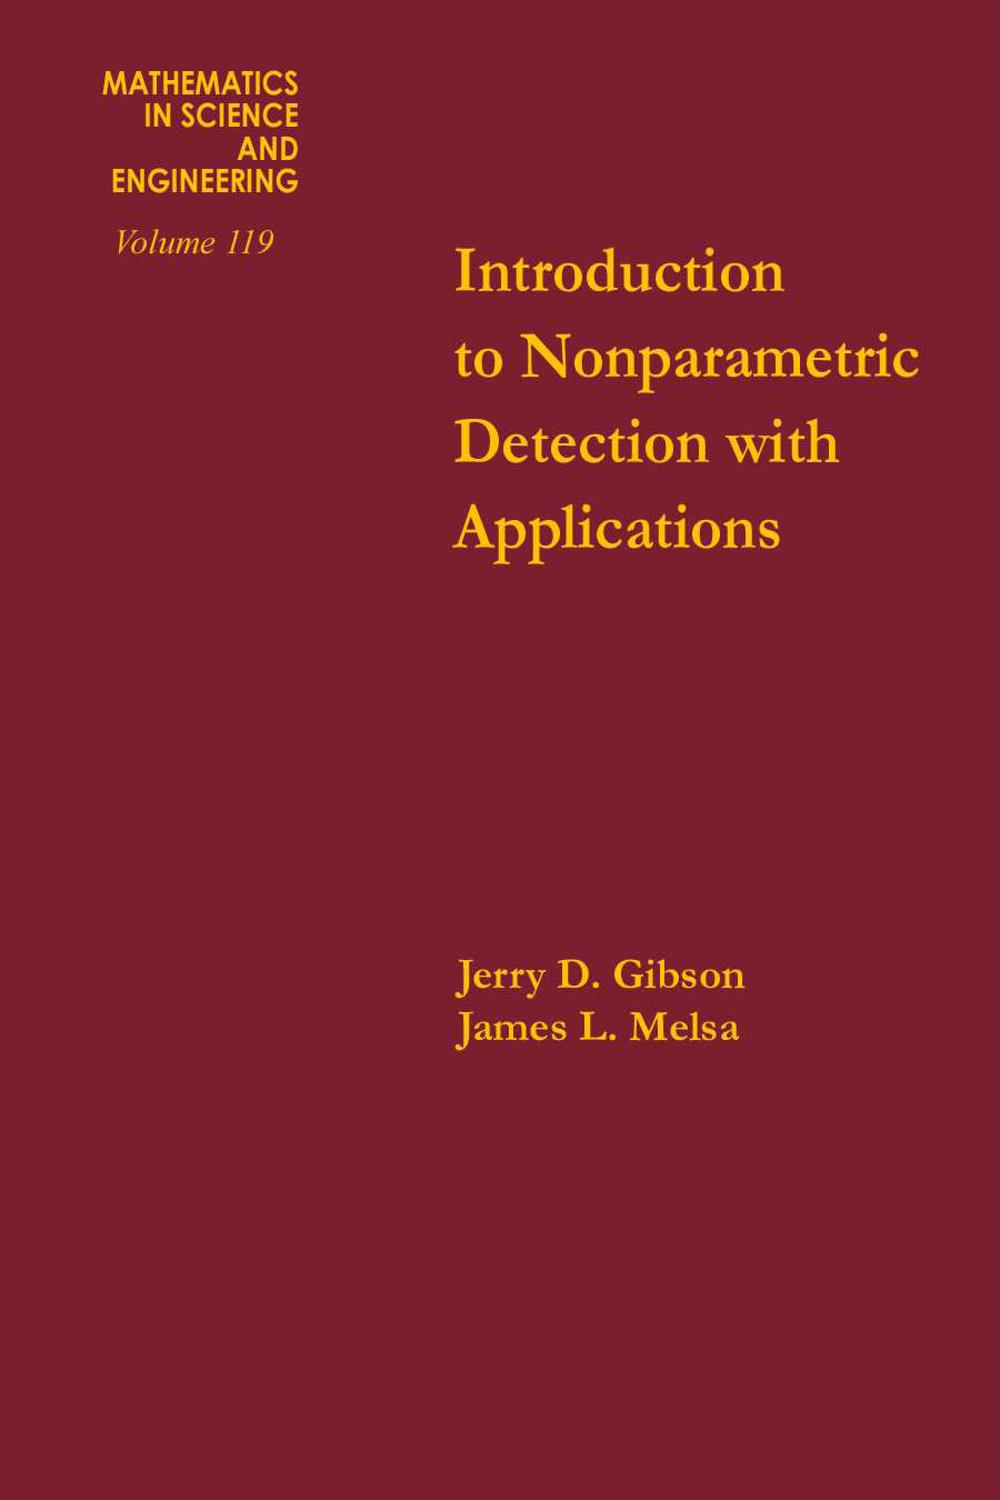 Introduction to Nonparametric Detection with Applications - Jerry D. Gibson, James L Melsa